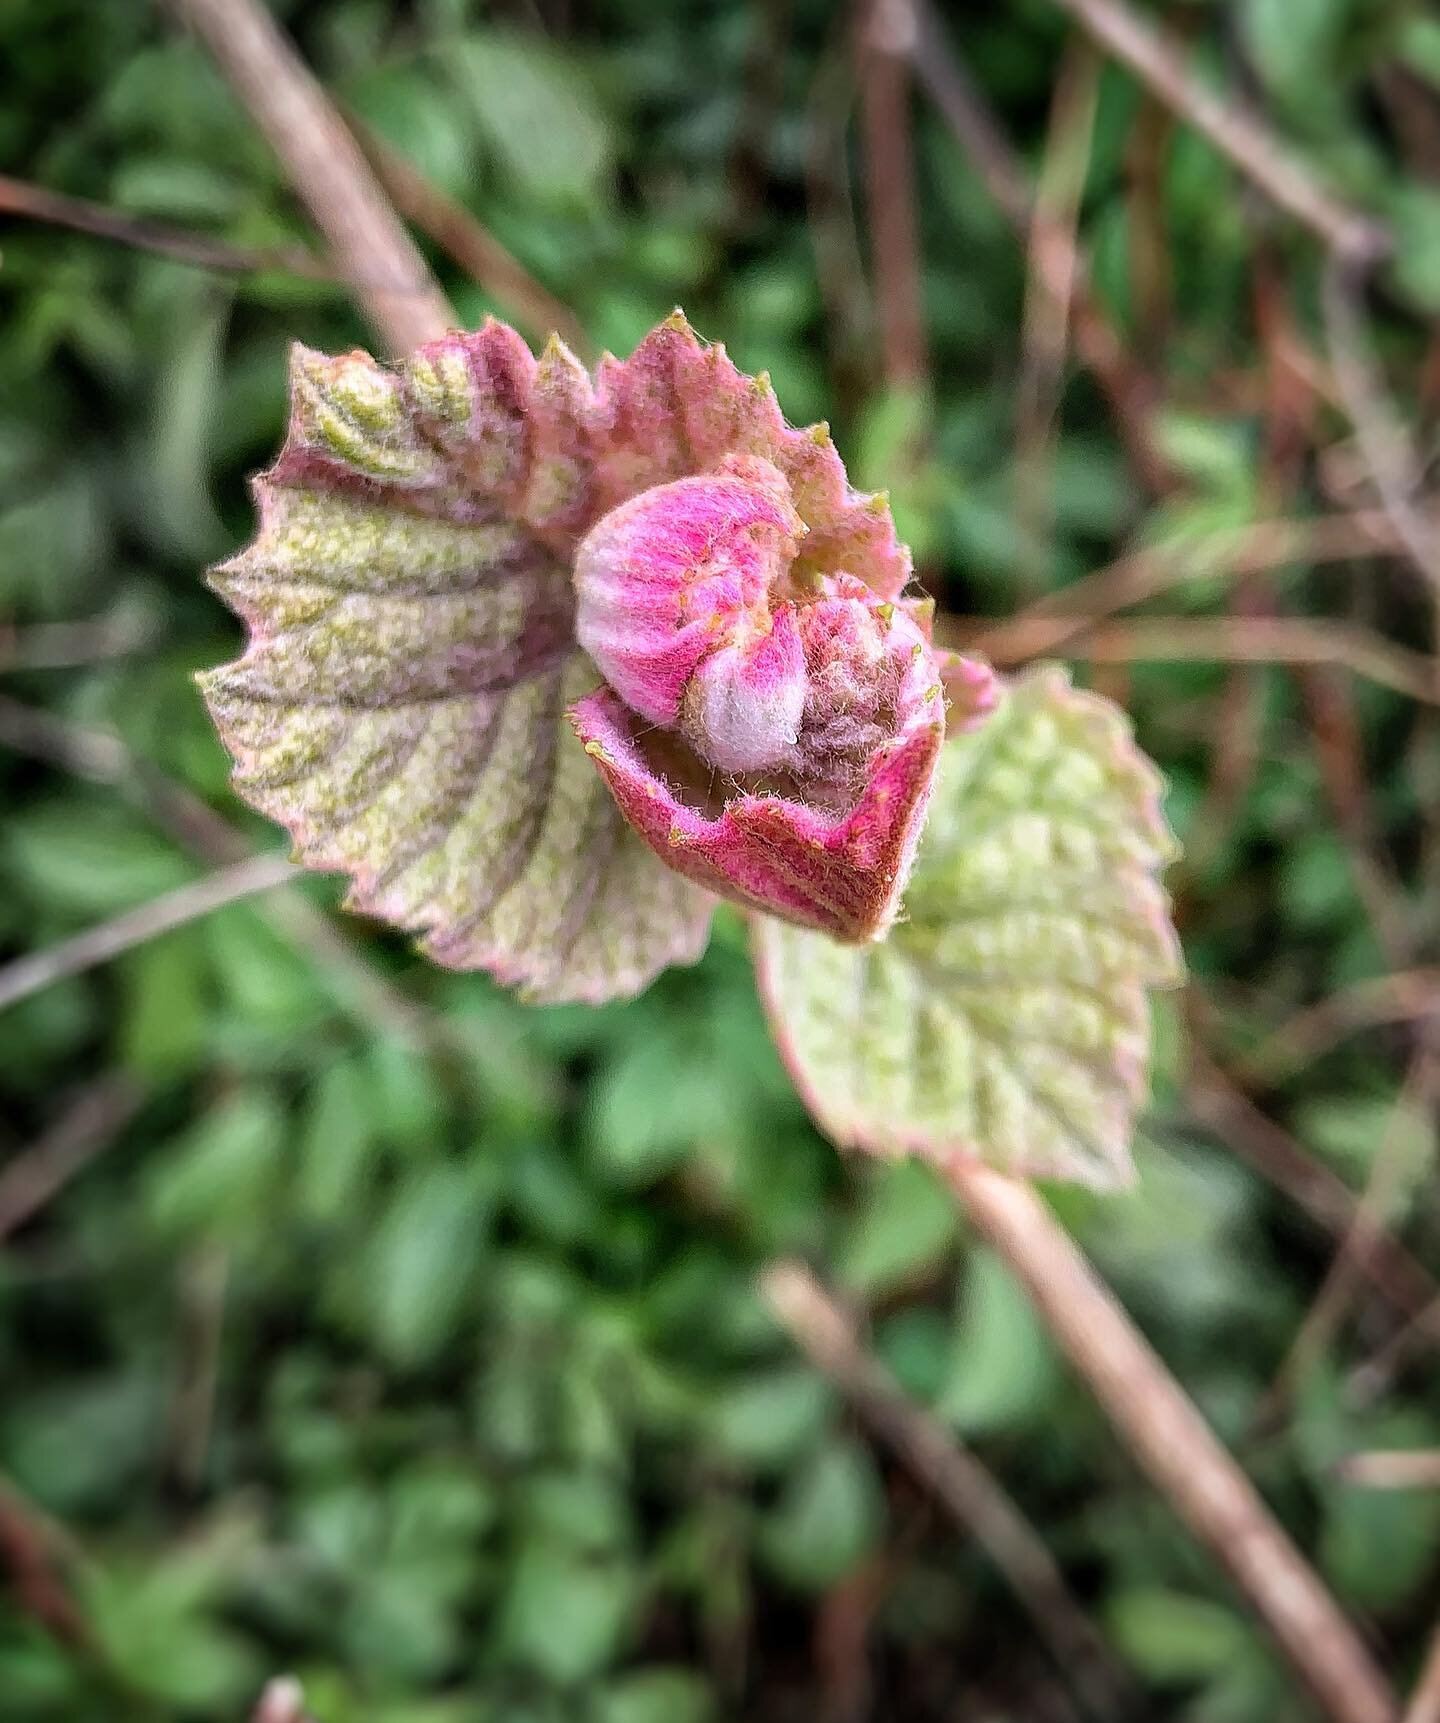 &ldquo;And the day came when the risk to remain tight in a bud was more painful than the risk it took to blossom.&rdquo; #anaisnin .
.
.
.
.
#mustanggrape #wildgrapeleaf #springmedicinemaking #permaculture #regenerativeagriculture #medicinalherbs #me